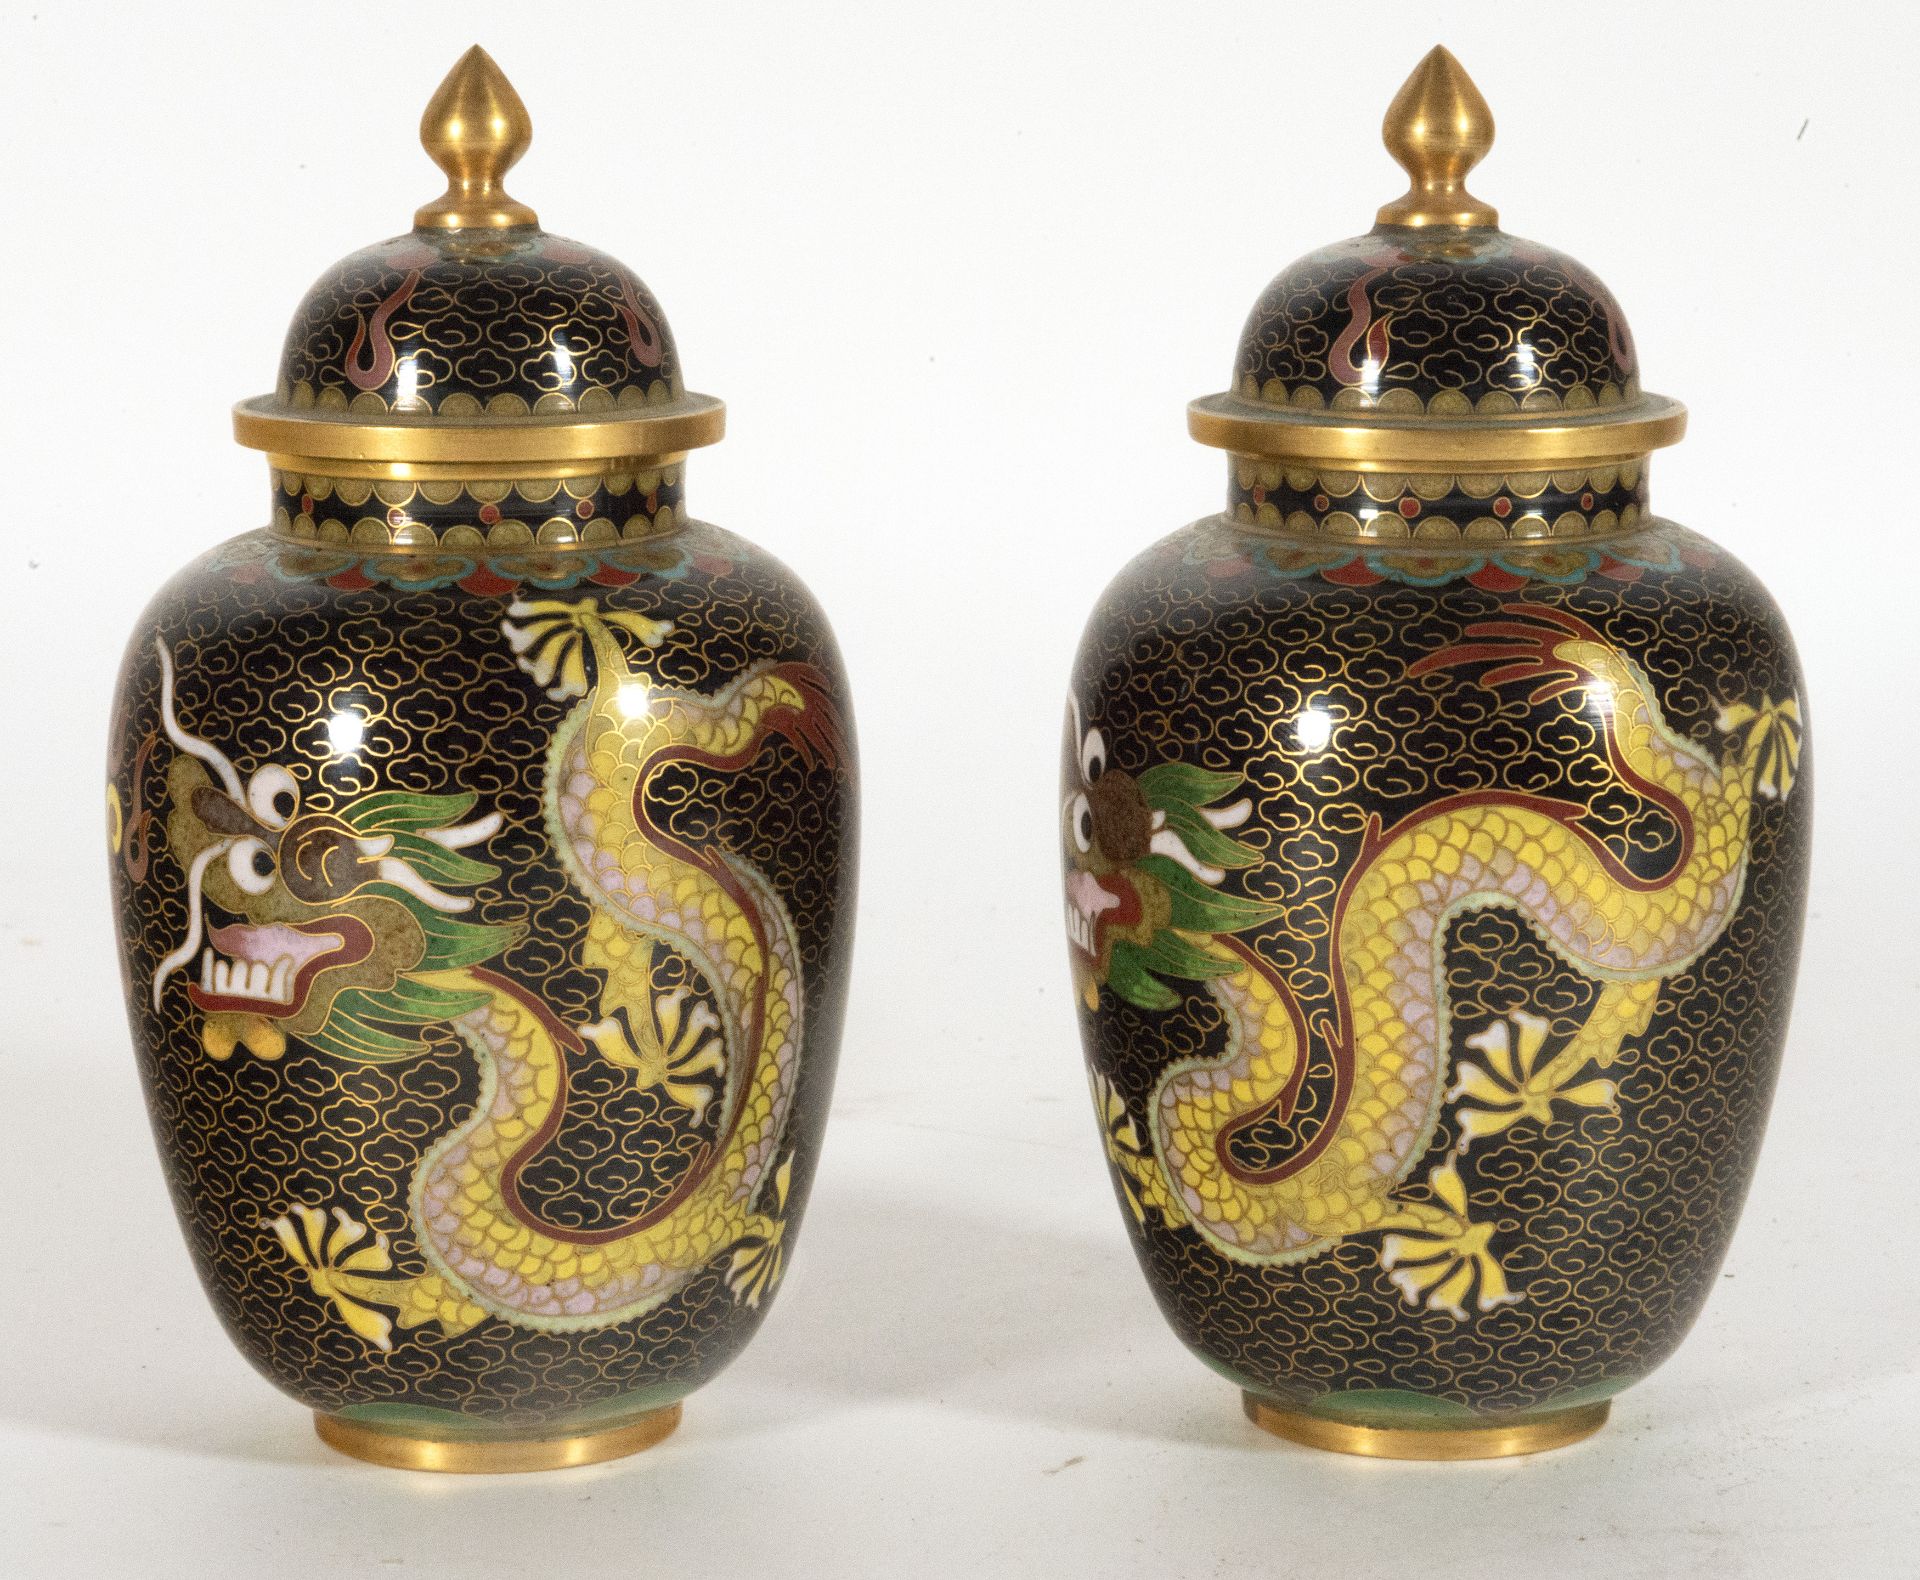 Pair of 20th century Chinese cloisonne tibors